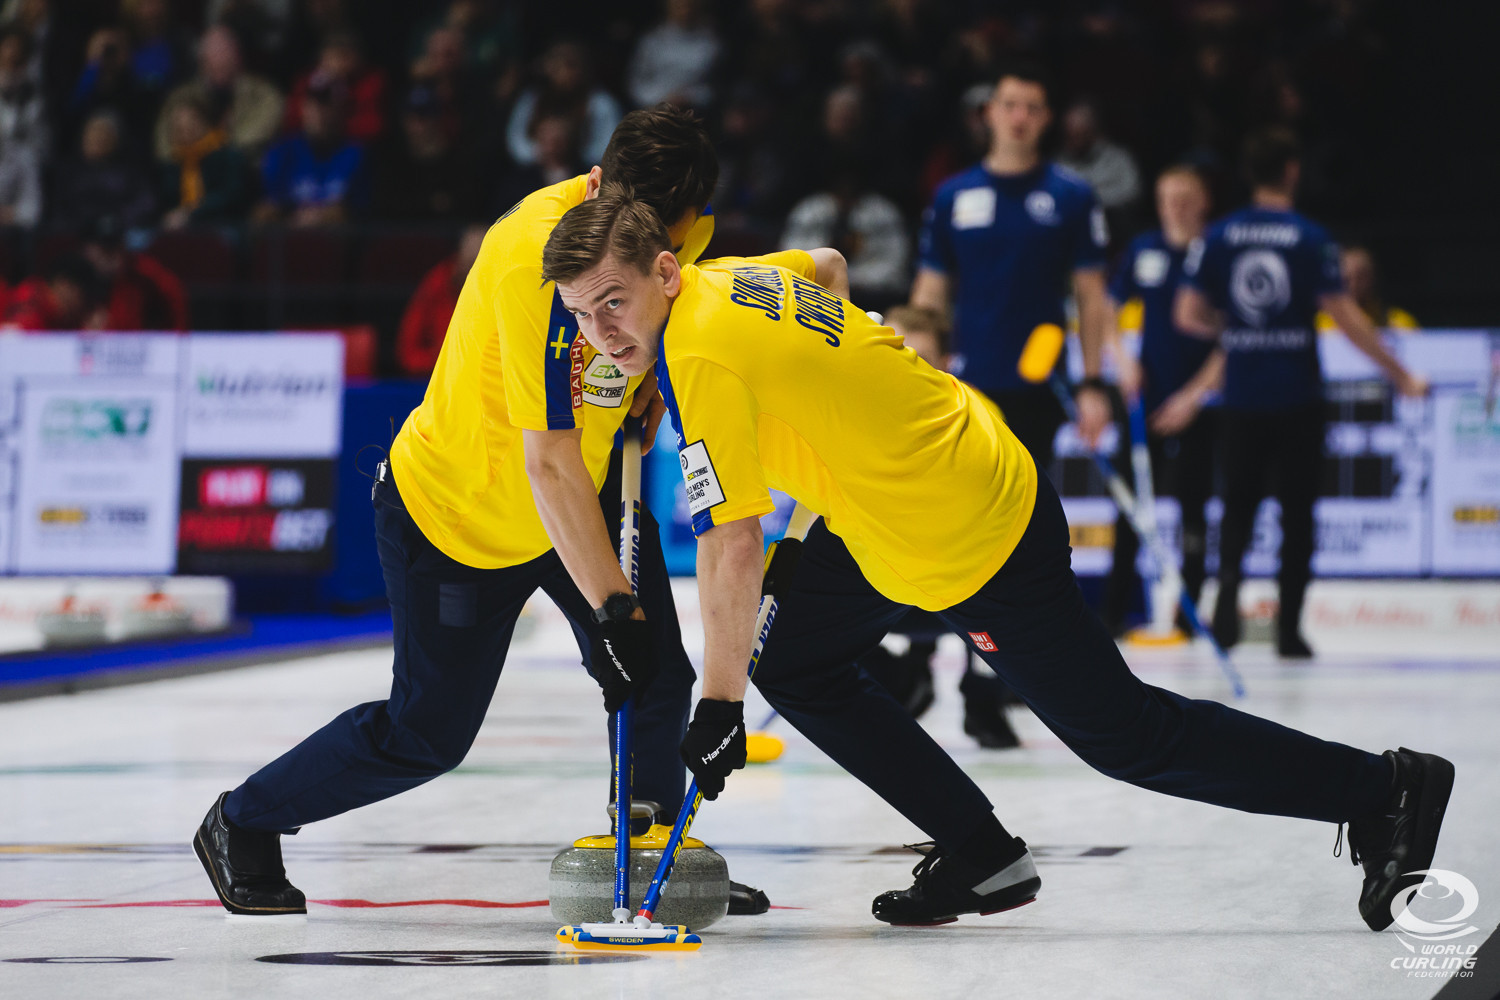 Sweden are one of four unbeaten teams remaining at the World Men's Curling Championship ©World Curling